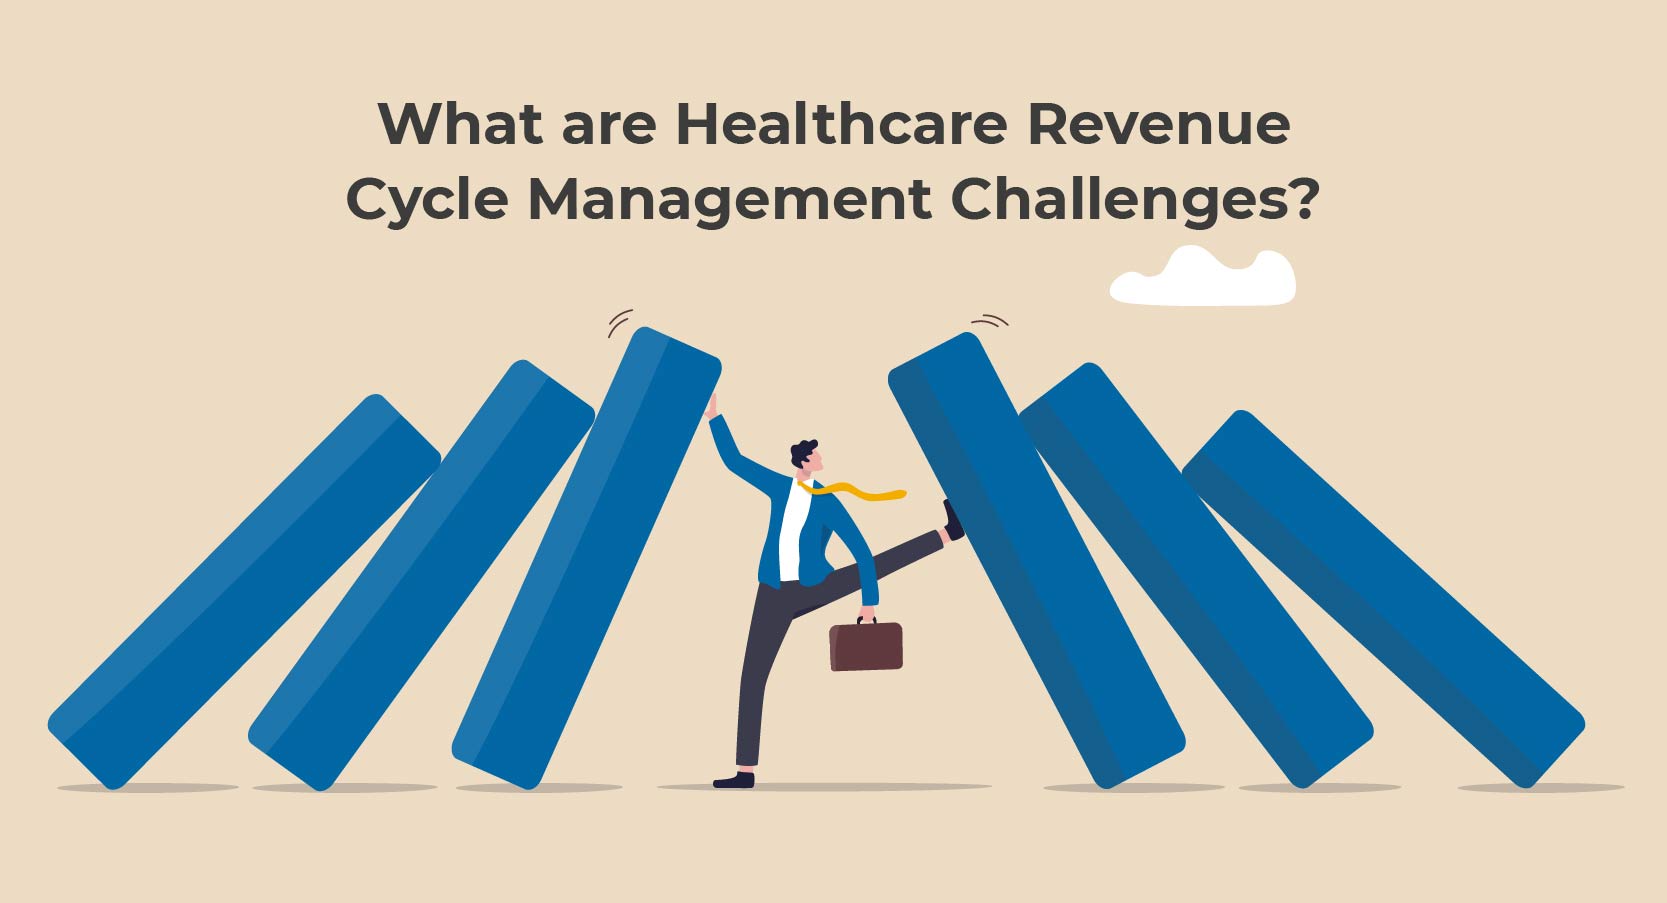 What are Healthcare Revenue Cycle Management Challenges?